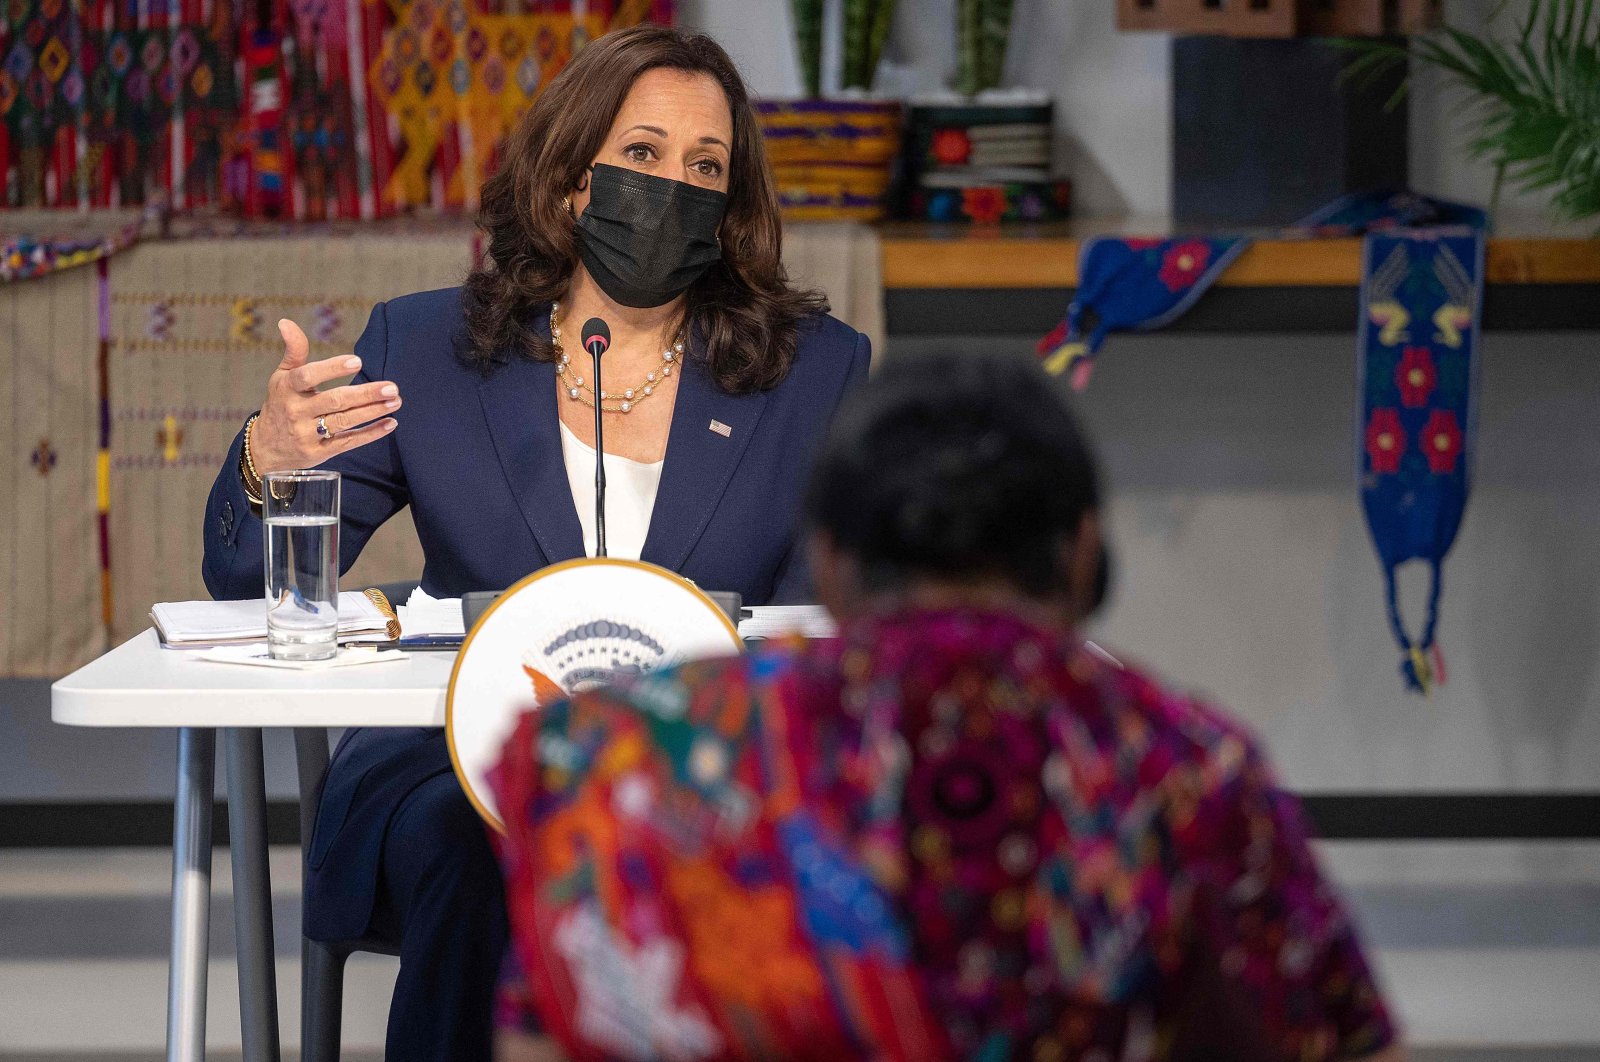 U.S. Vice President Kamala Harris participates in a roundtable with the Guatemalan community and civil society leaders to continue conversations about how best to address the root causes of migration at Universidad del Valle de Guatemala in Guatemala City, Guatemala, June 7, 2021. (AFP Photo)